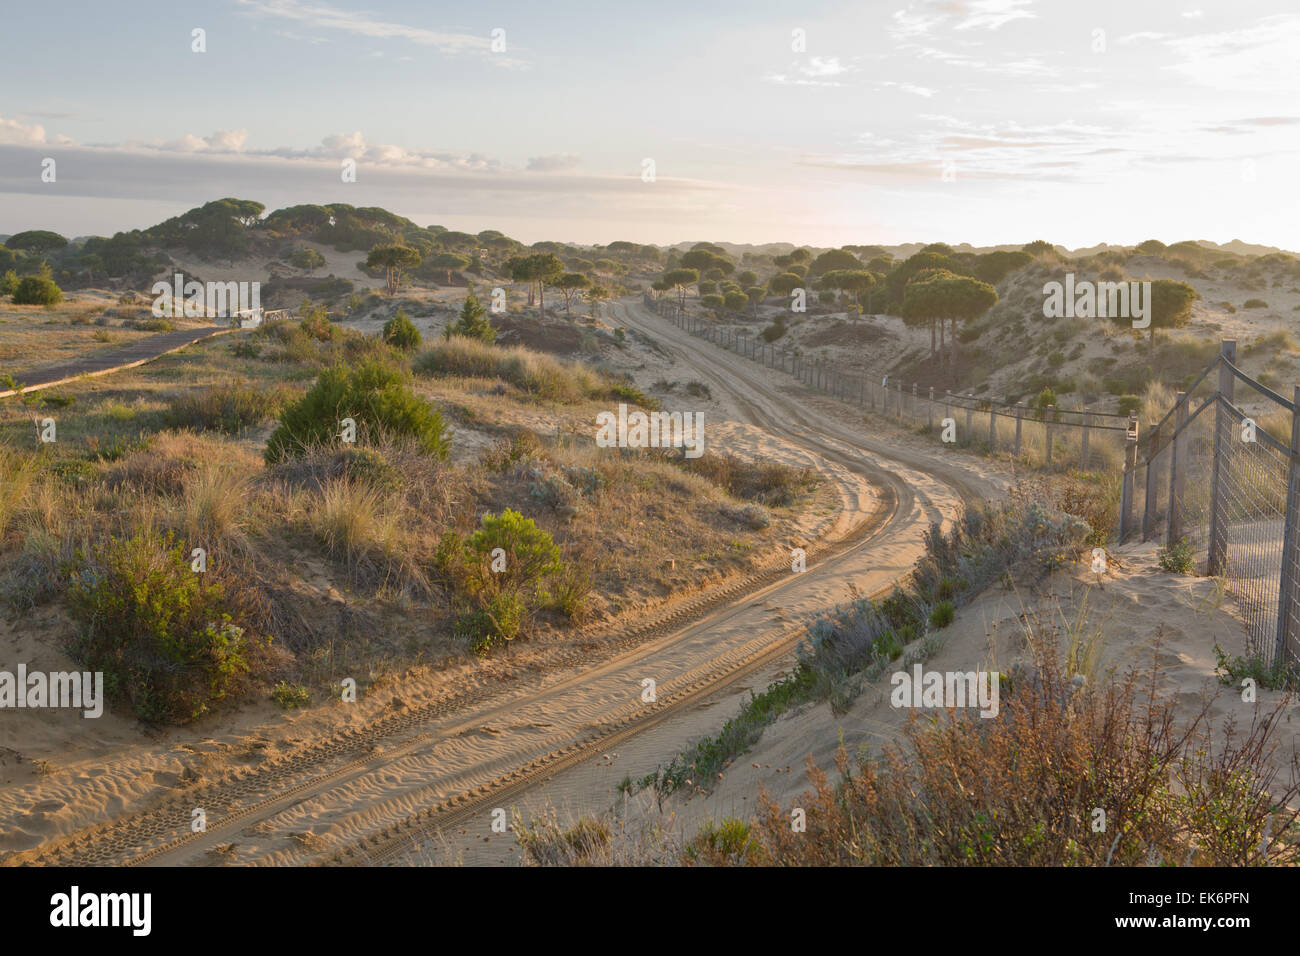 Donana National Park located in Andalusia. Area of marsh, shallow streams, and sand dunes in Las Marismas, the Guadalquivir Rive Stock Photo